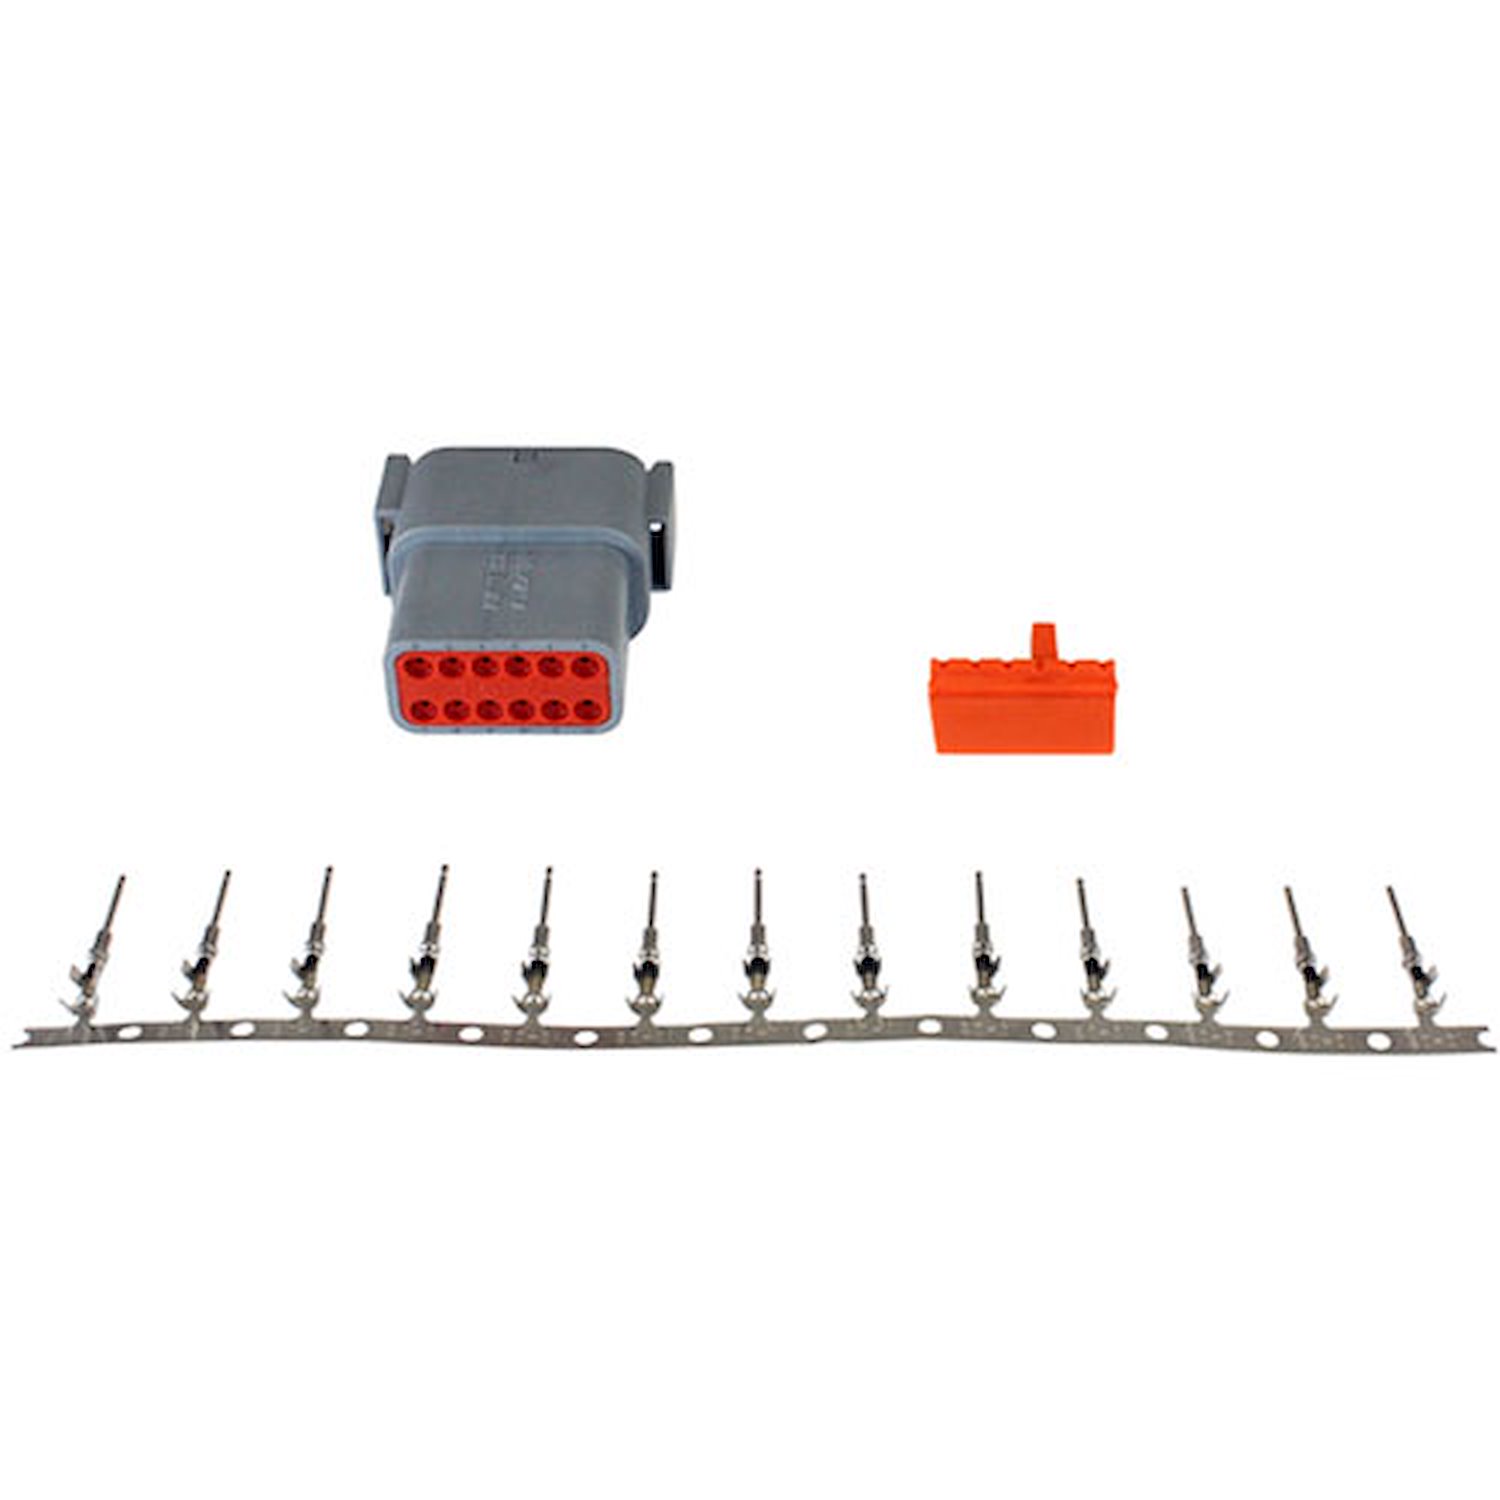 DTM-Style 12-Way Receptacle Connector Kit Includes Receptacle, Receptacle Wedge Lock And 13 Male Pins